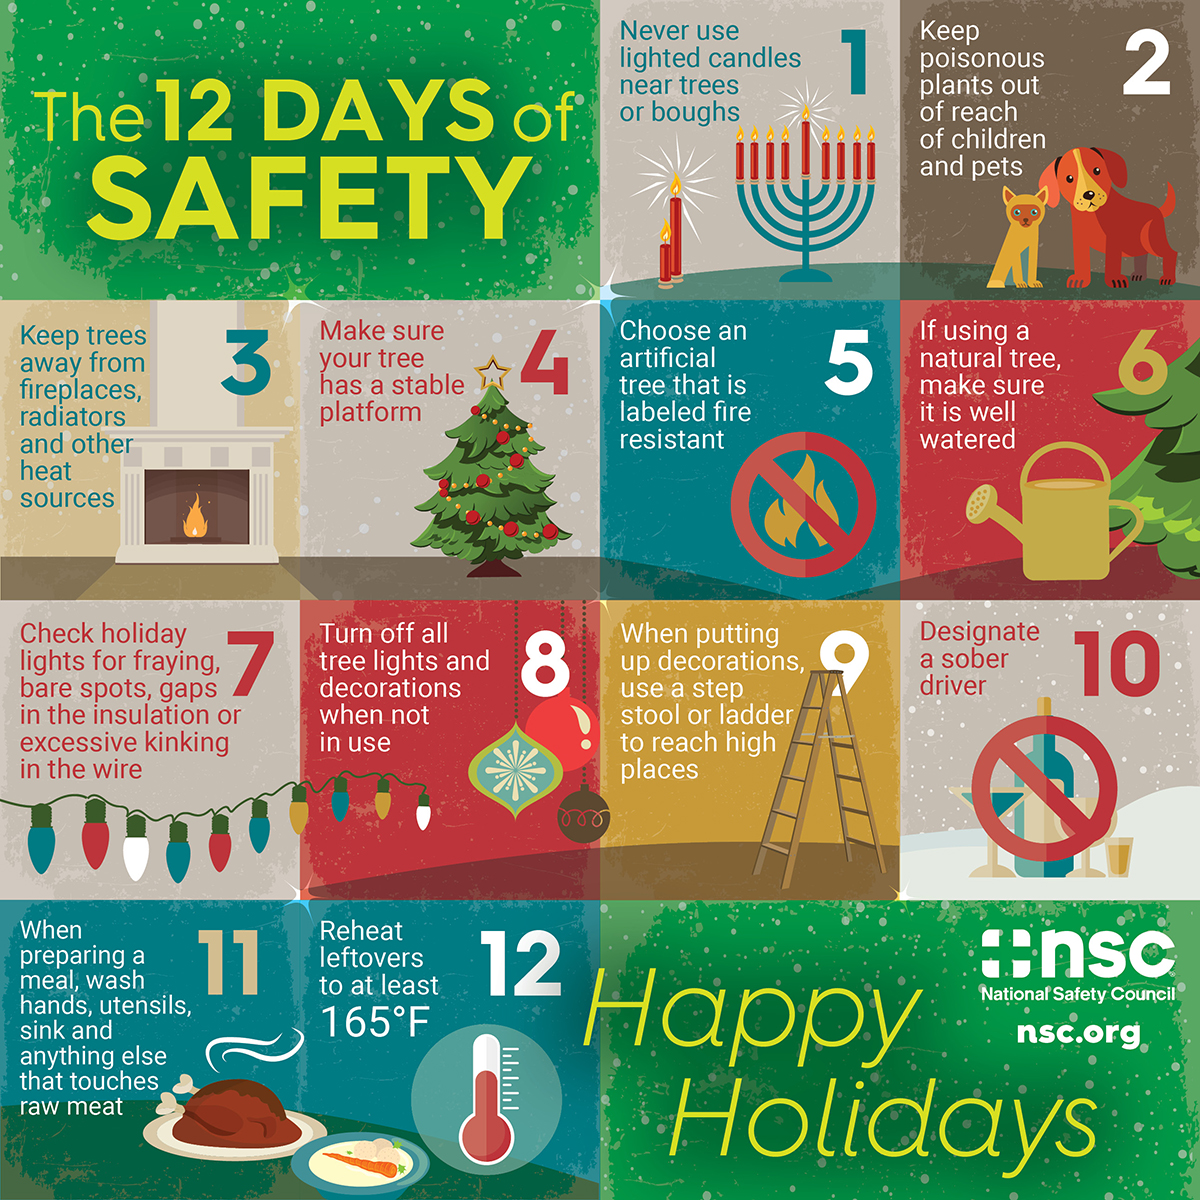 Holiday safety tips from the National Safety Council, 2016-11-10